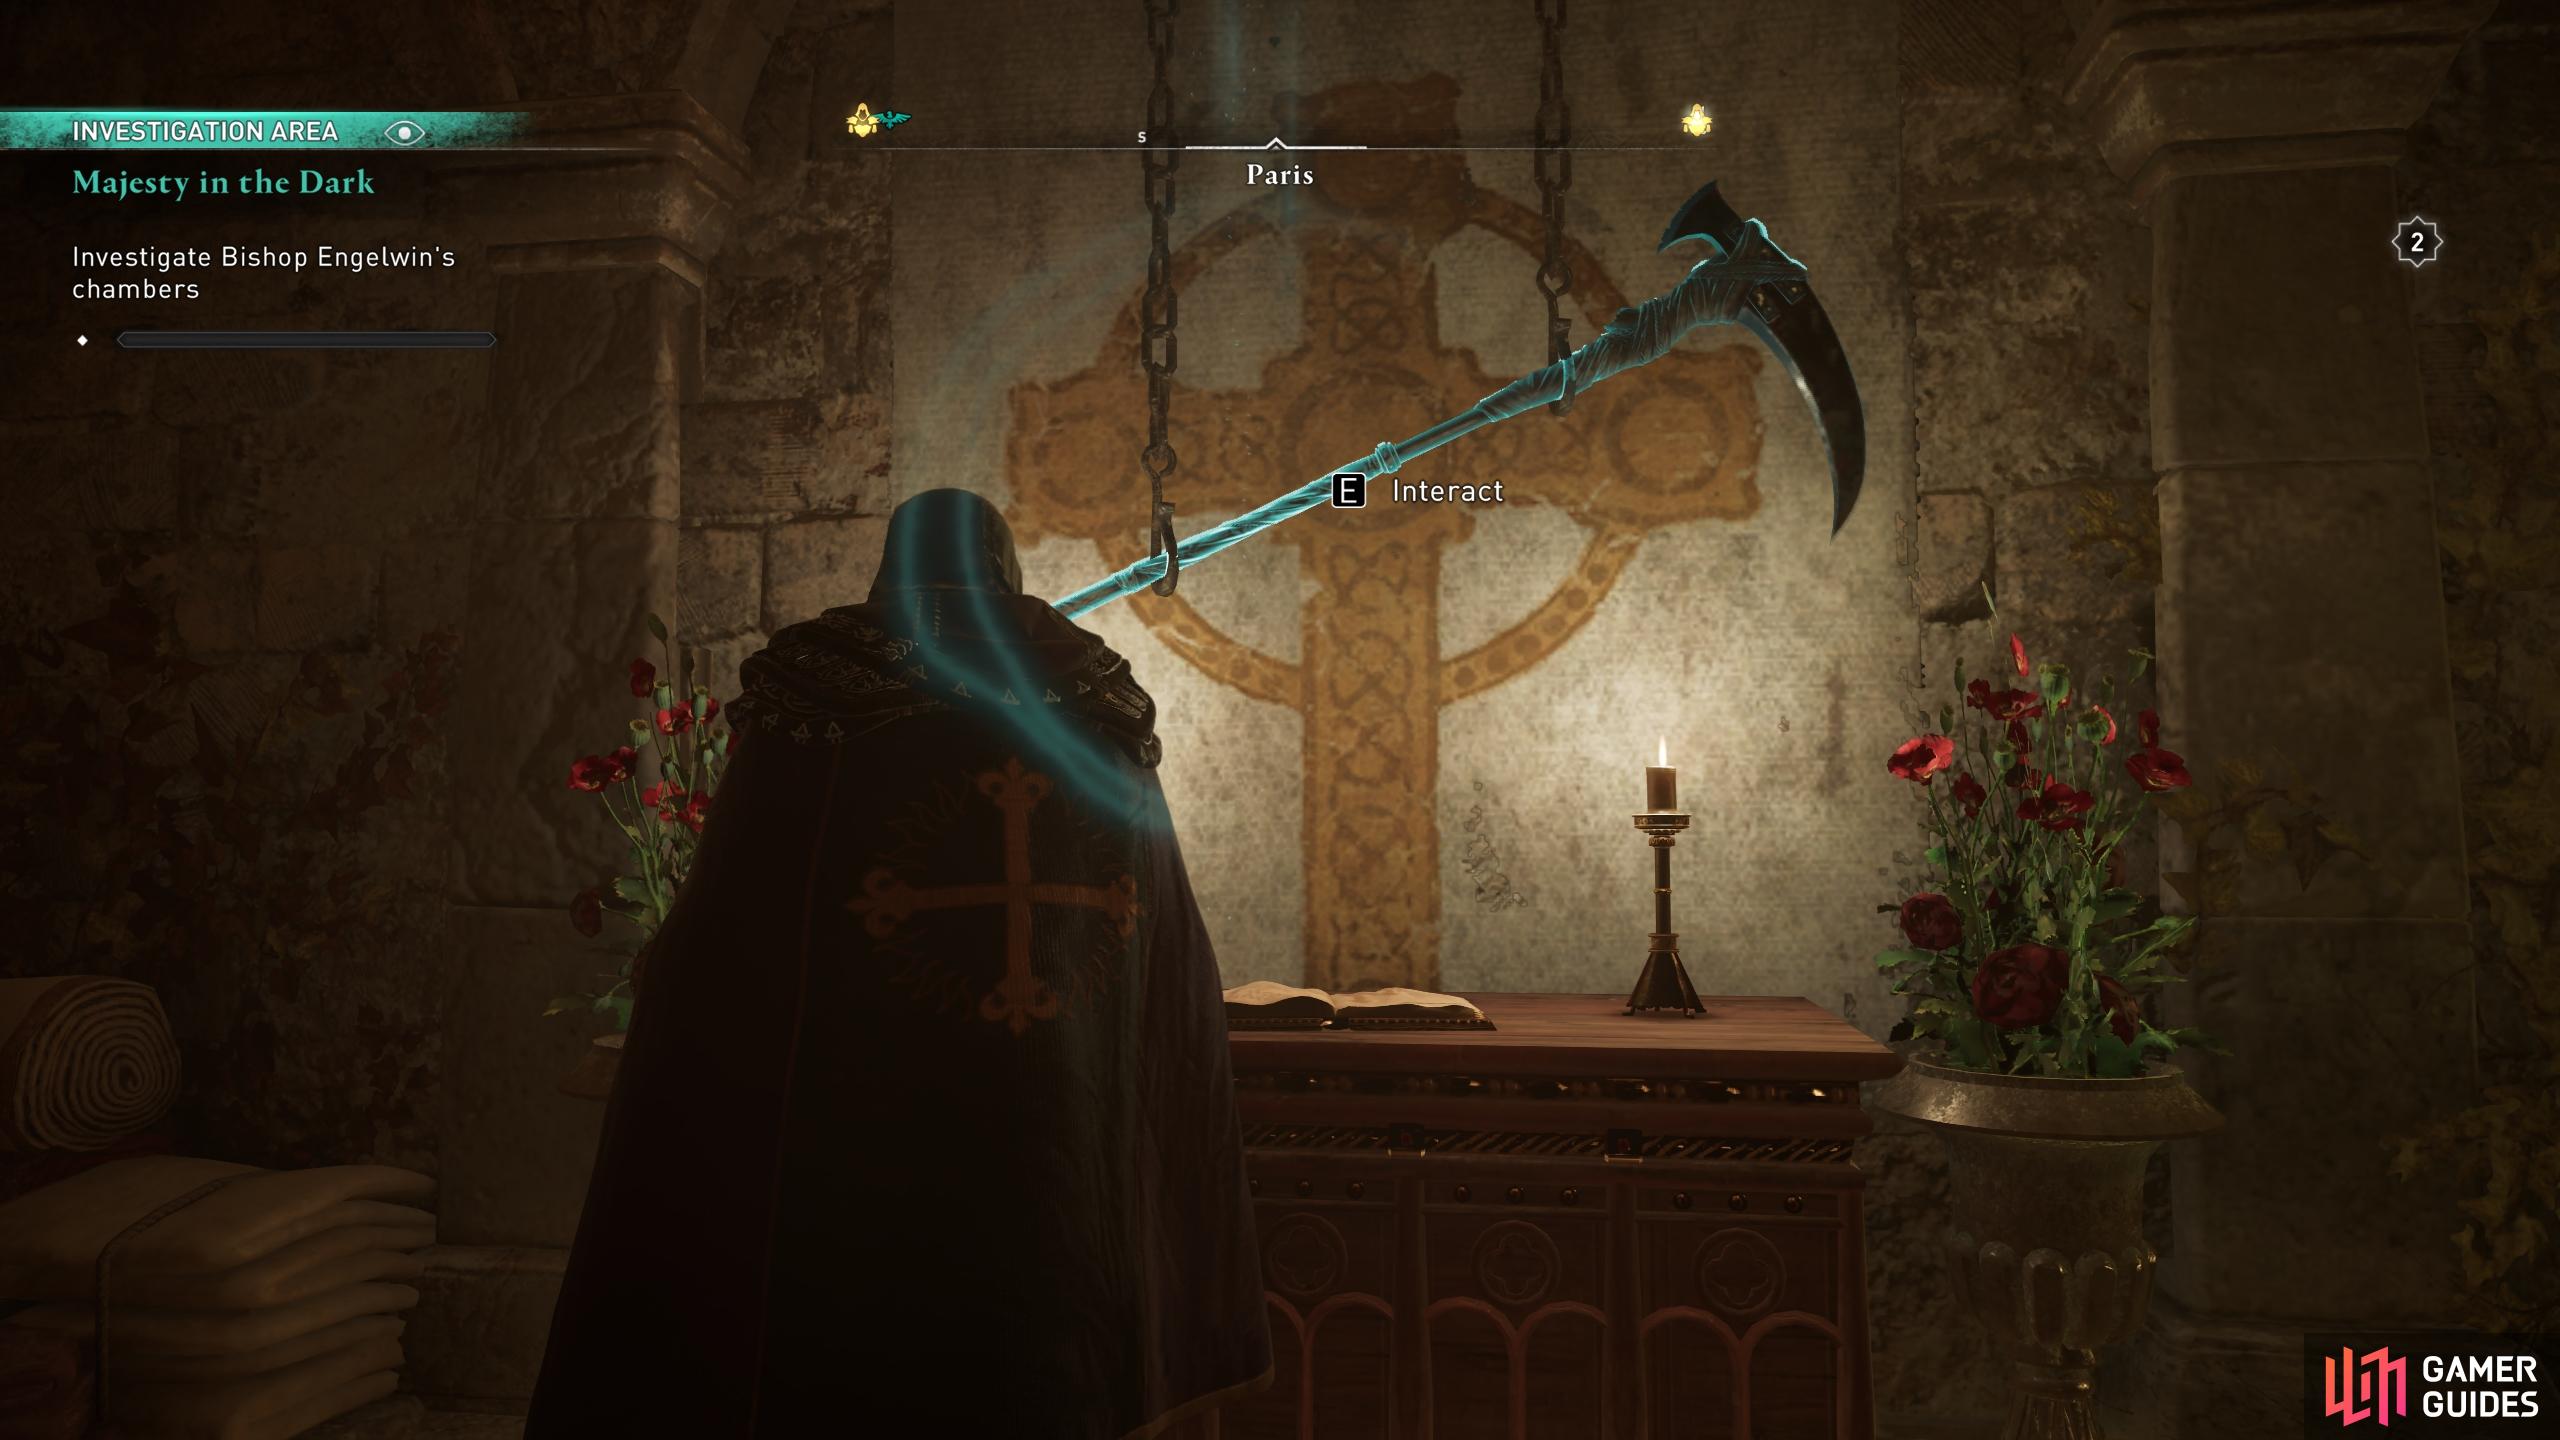 Interact with the scythe on the wall to take it into your inventory.